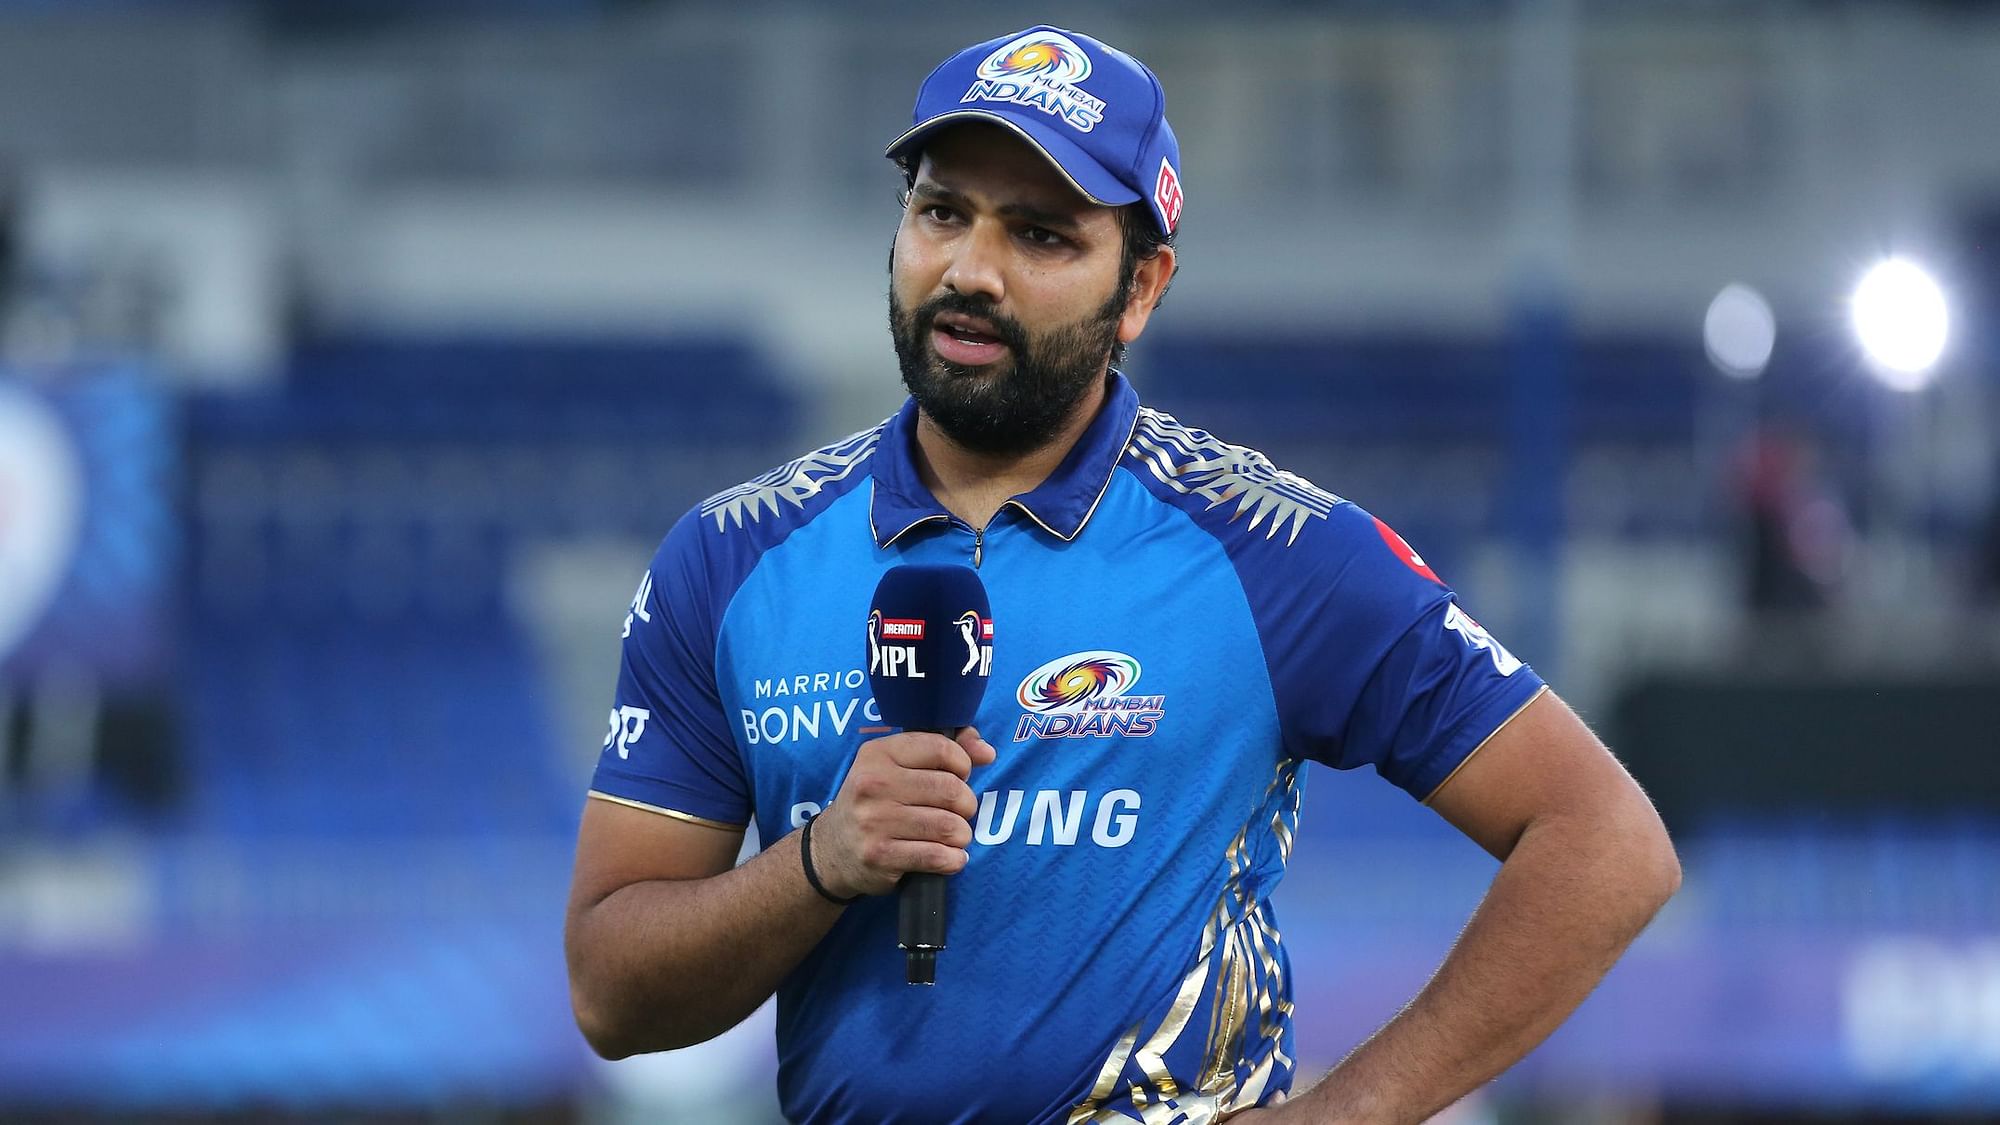 Rohit Sharma was back playing for Mumbai Indians after missing four games due to a hamstring injury.